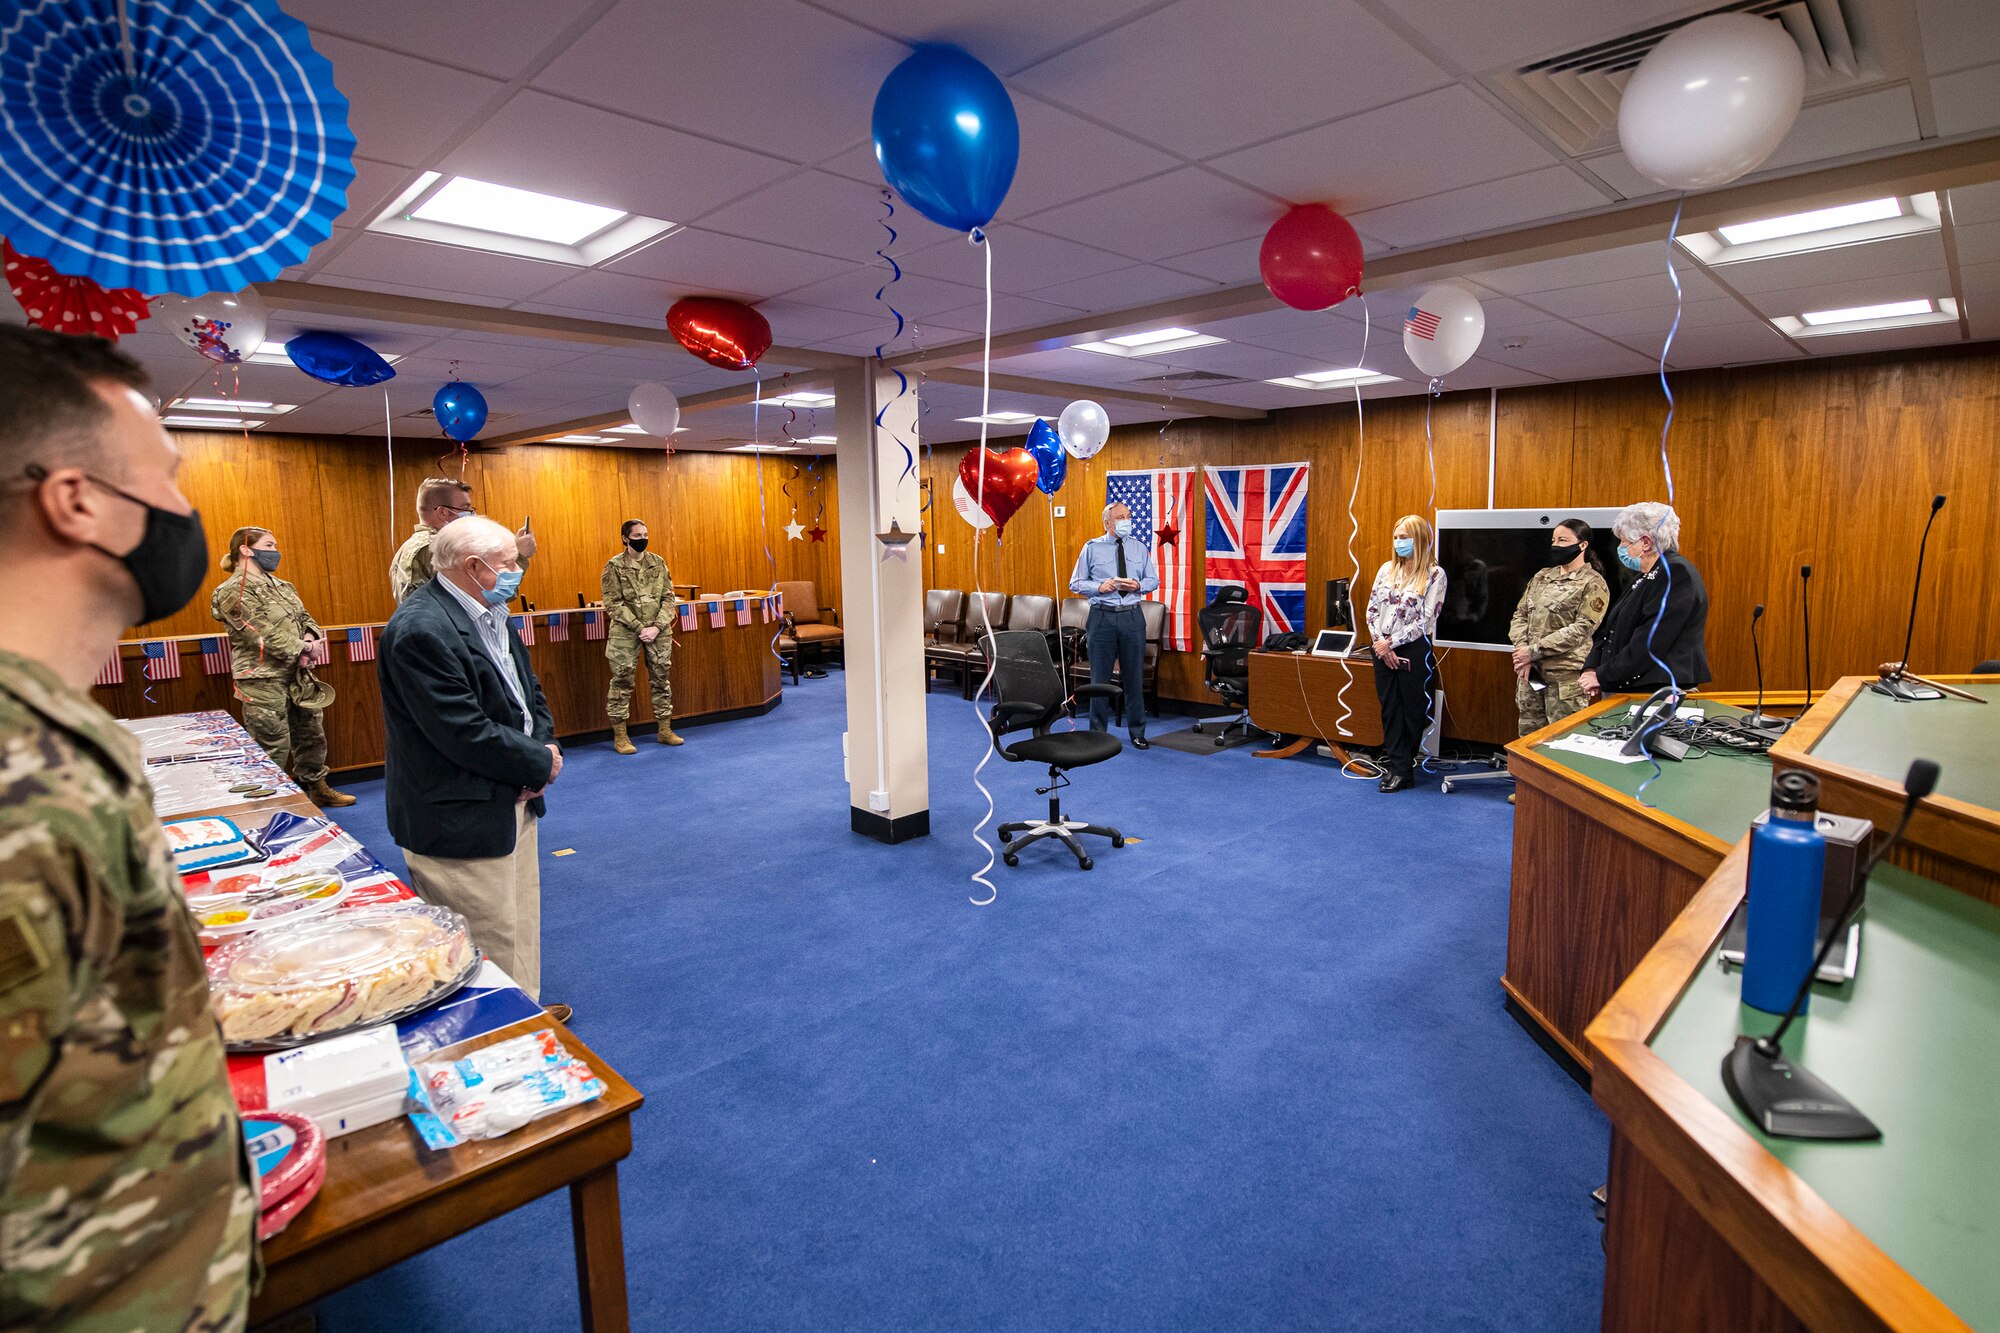 The 501st Combat Support Wing judge advocate office hosts a celebration for Valerie Lucas, right, 501st CSW British liaison officer, at RAF Alconbury, England, April 23, 2021. The 501 CSW/JA office celebrated Mrs. Lucas for her 60 years of service as the British liaison officer at RAF Alconbury. (U.S. Air Force photo by Senior Airman Eugene Oliver)